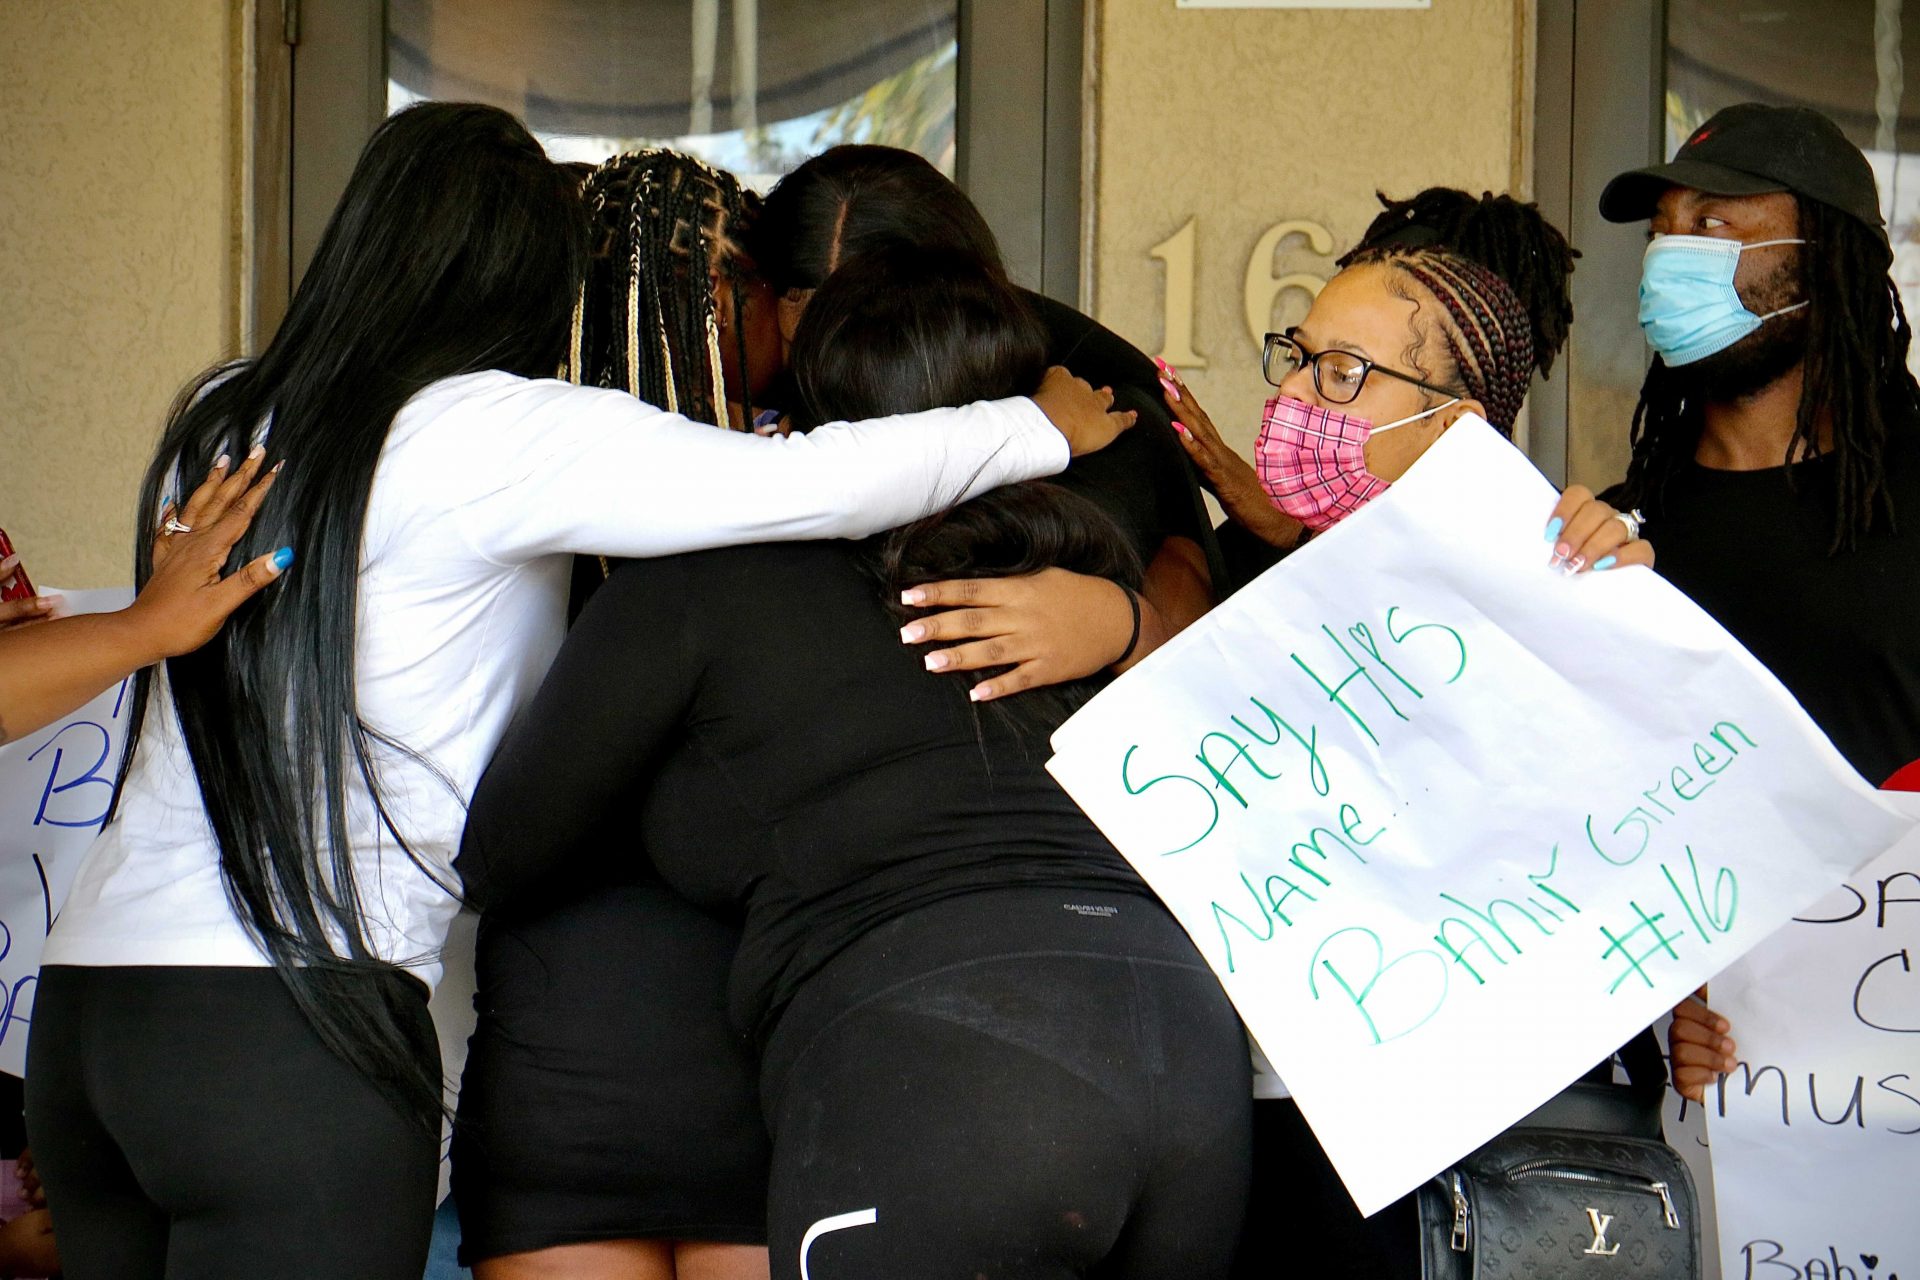 Bahir Green’s sisters and supporters comfort each other during a press conference in front of Chester police headquarters. The 16-year-old was arrested Friday and remains in custody.